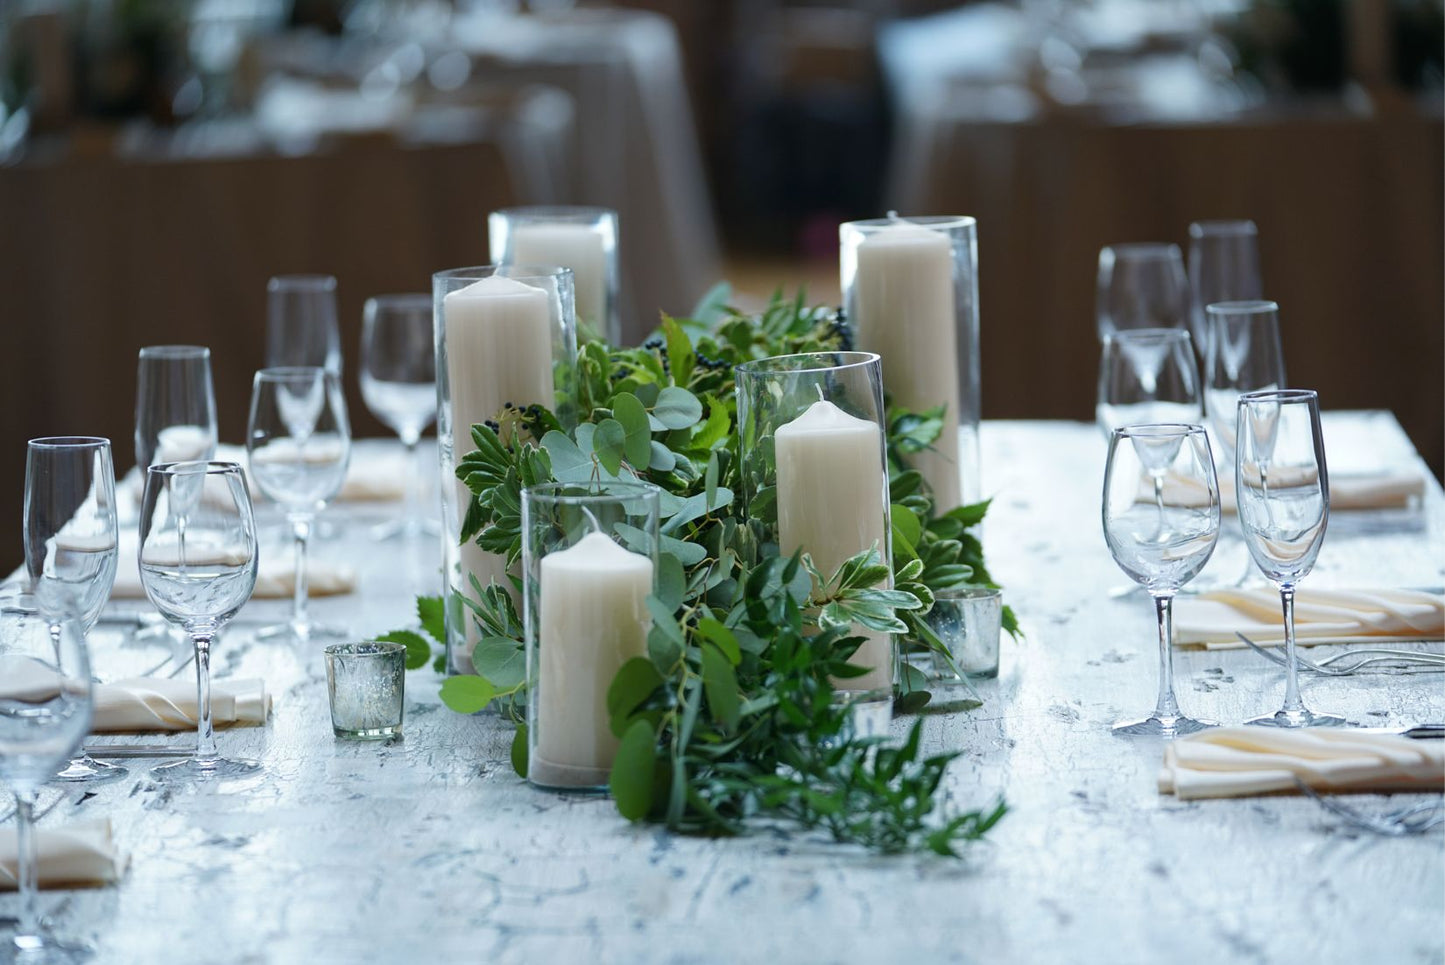 Glass vases for pickup and rent. Decorate with candles for table centerpieces.